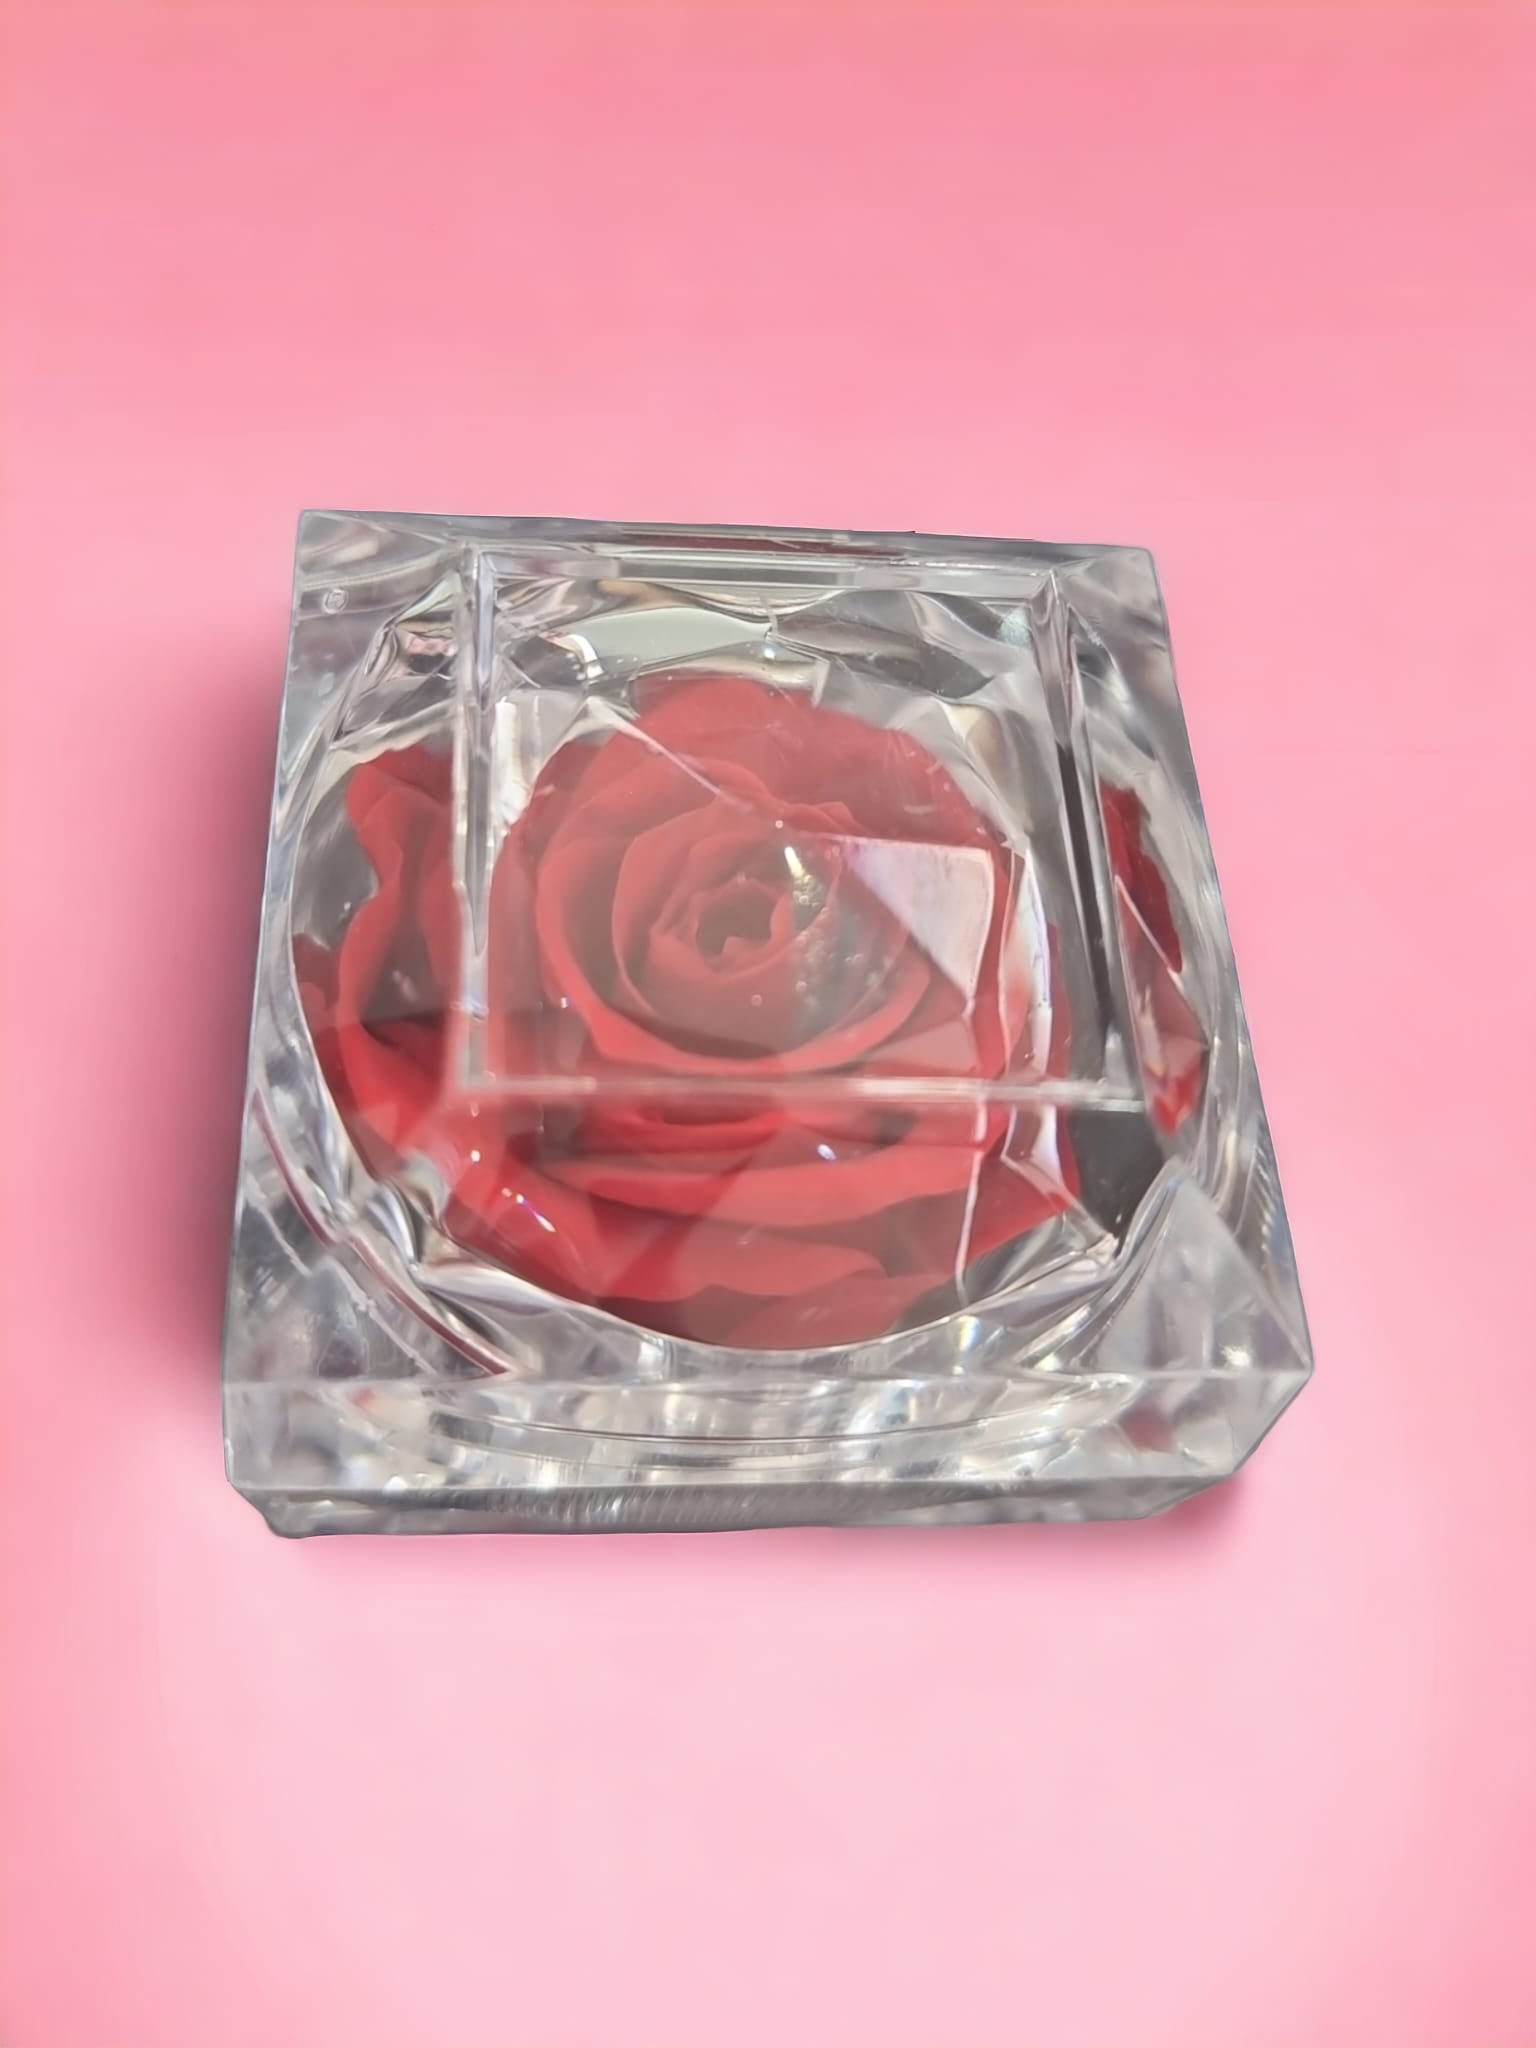 Preserved Red Rose in Glass Acrylic Box - A Perfect Valentine's Day Gift - Auras Workshop  -   -   - Cyprus & Greece - Wholesale - Retail #